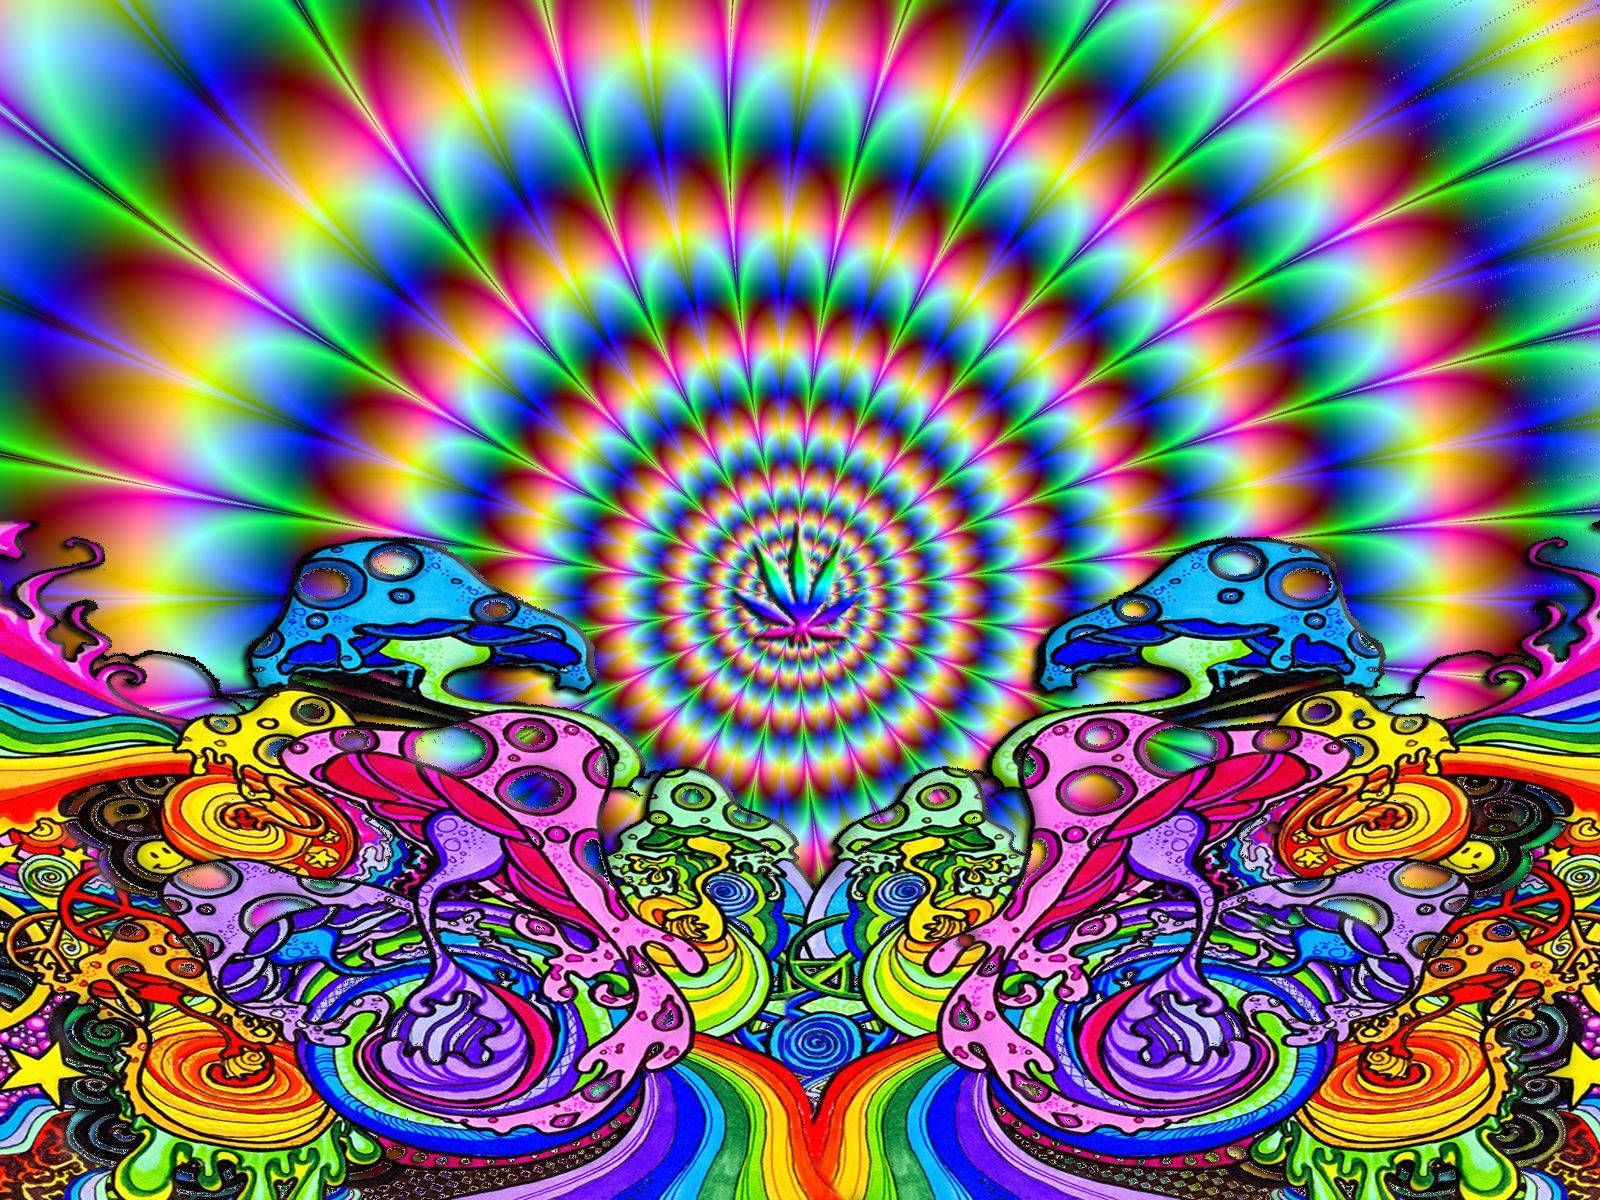 Psychedelic weed image wallpaper in vibrant colors.